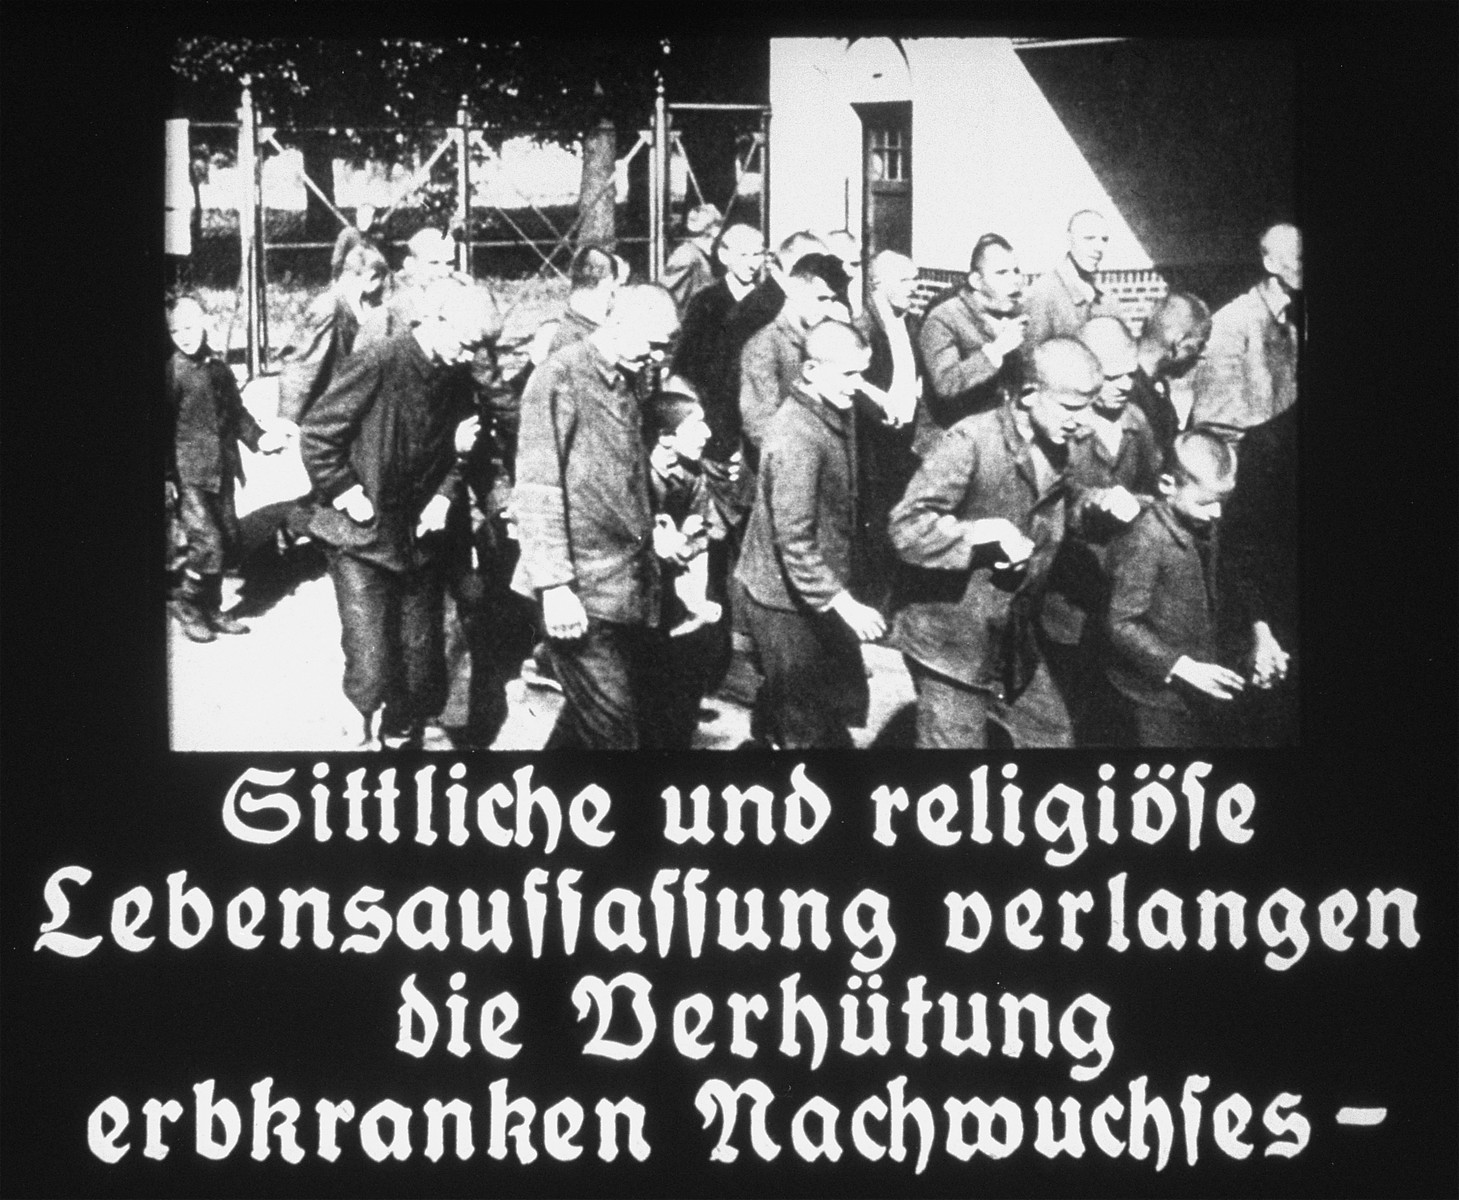 Propaganda slide featuring a a group of mentally ill patients being escorted outside in an unidentified asylum.  The caption reads, "Moral and religious concepts of life demand the protection of the congenitally ill."